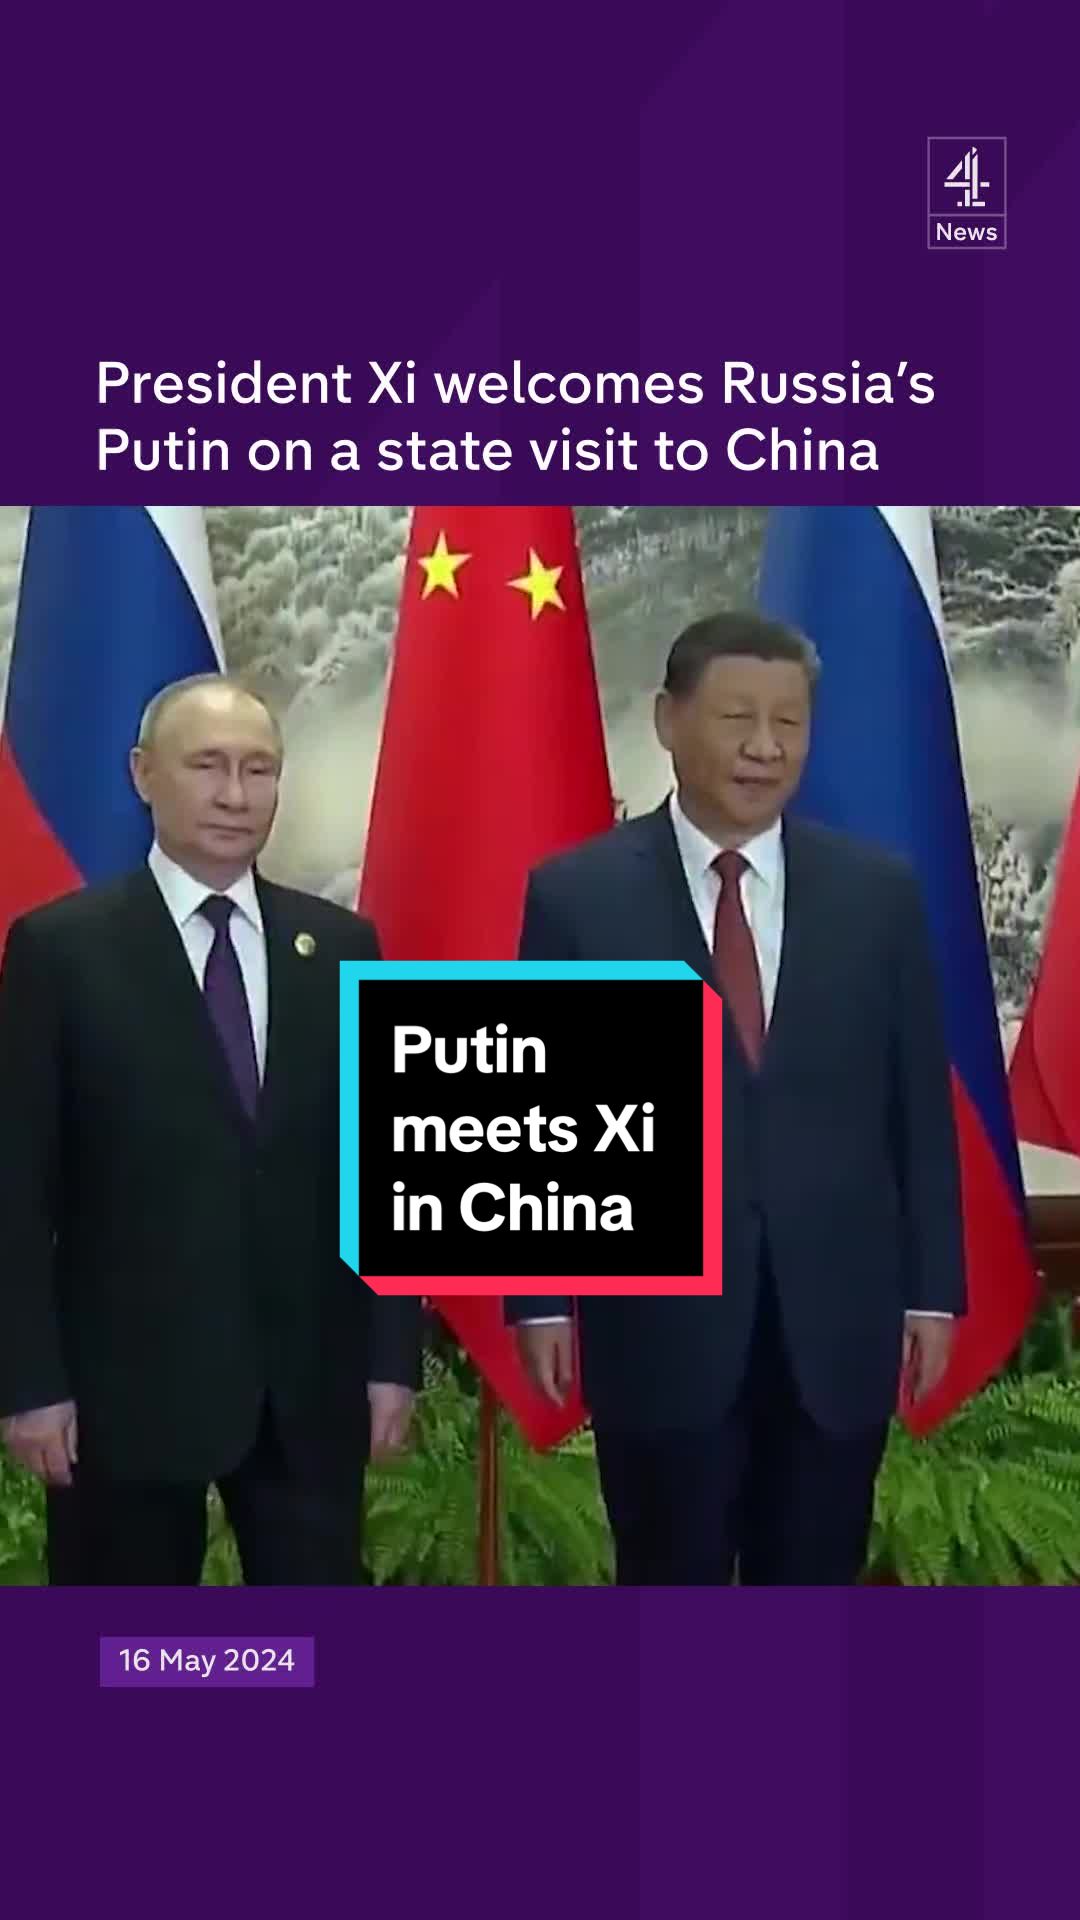 Vladimir Putin and Chinese president Xi Jinping have staged a high-profile meeting in Beijing - their first meeting since Russia's president was re-elected, effectively unopposed in March. Putin hailed the countries’ economic ties and said Russia and China’s partnership was a "stabilising factor" in the world, as he tries to bolster China’s support for Russia’s wartime economy. #ChinaRussia #Russia #China #PutinXi #Putin #XiJinping #UkraineWar #Beijing #C4News